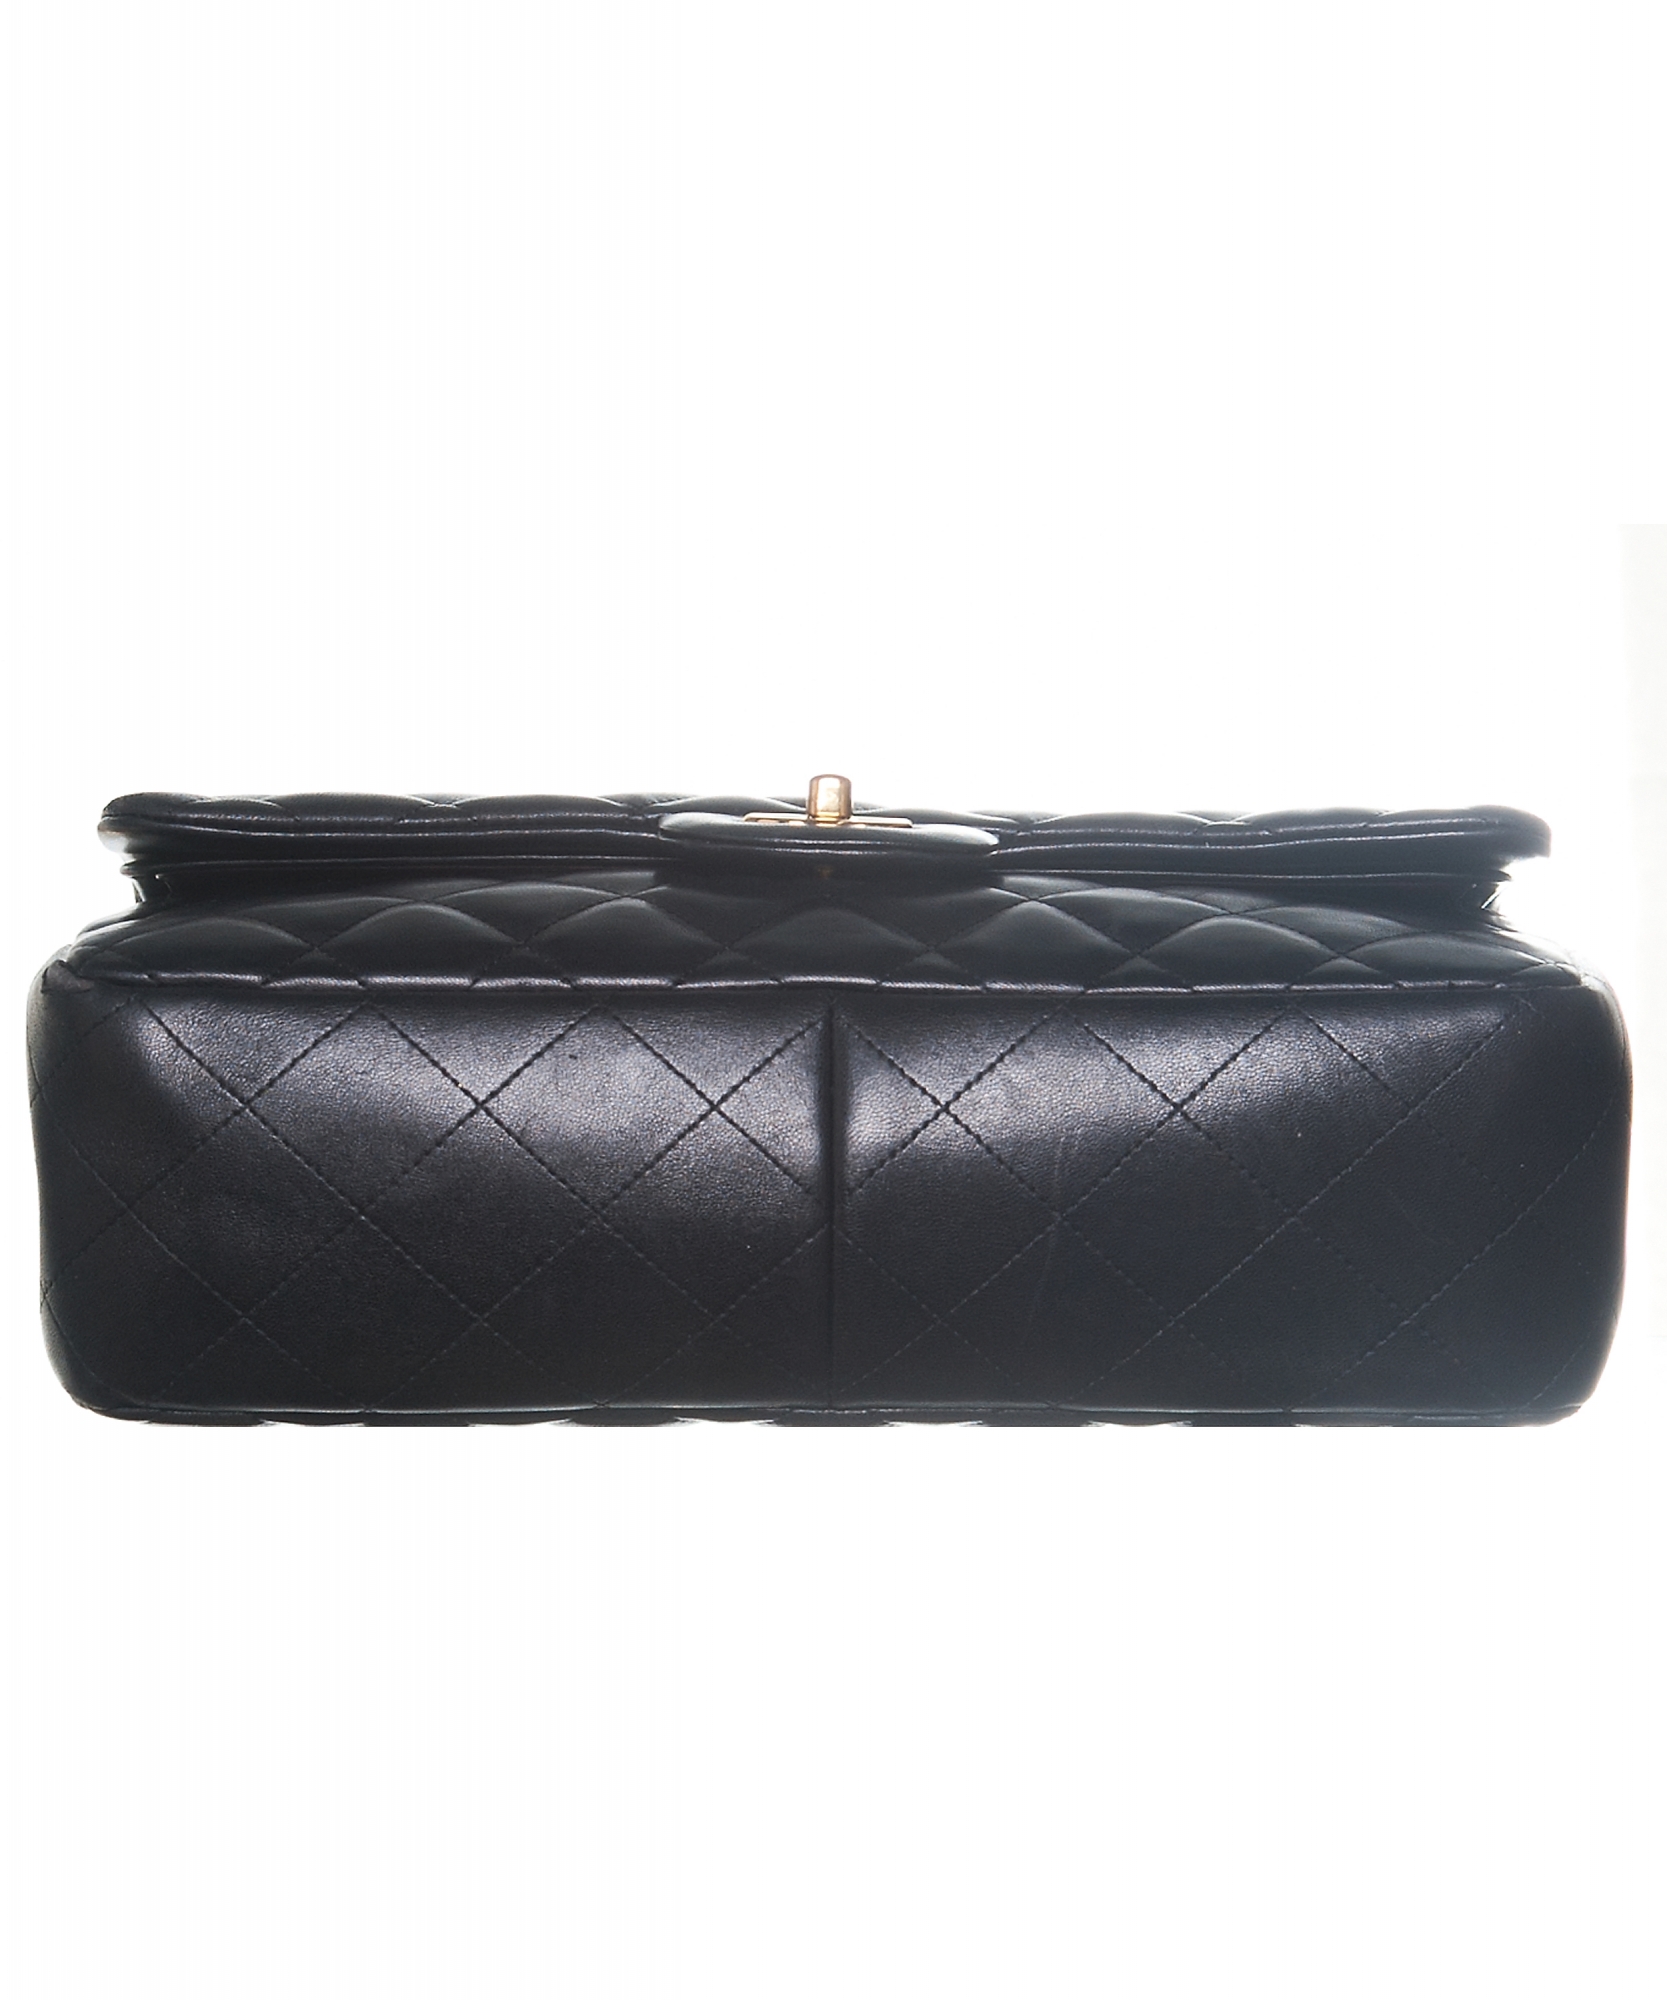 Chanel Black Quilted Lambskin Leather Classic Double Jumbo Flap